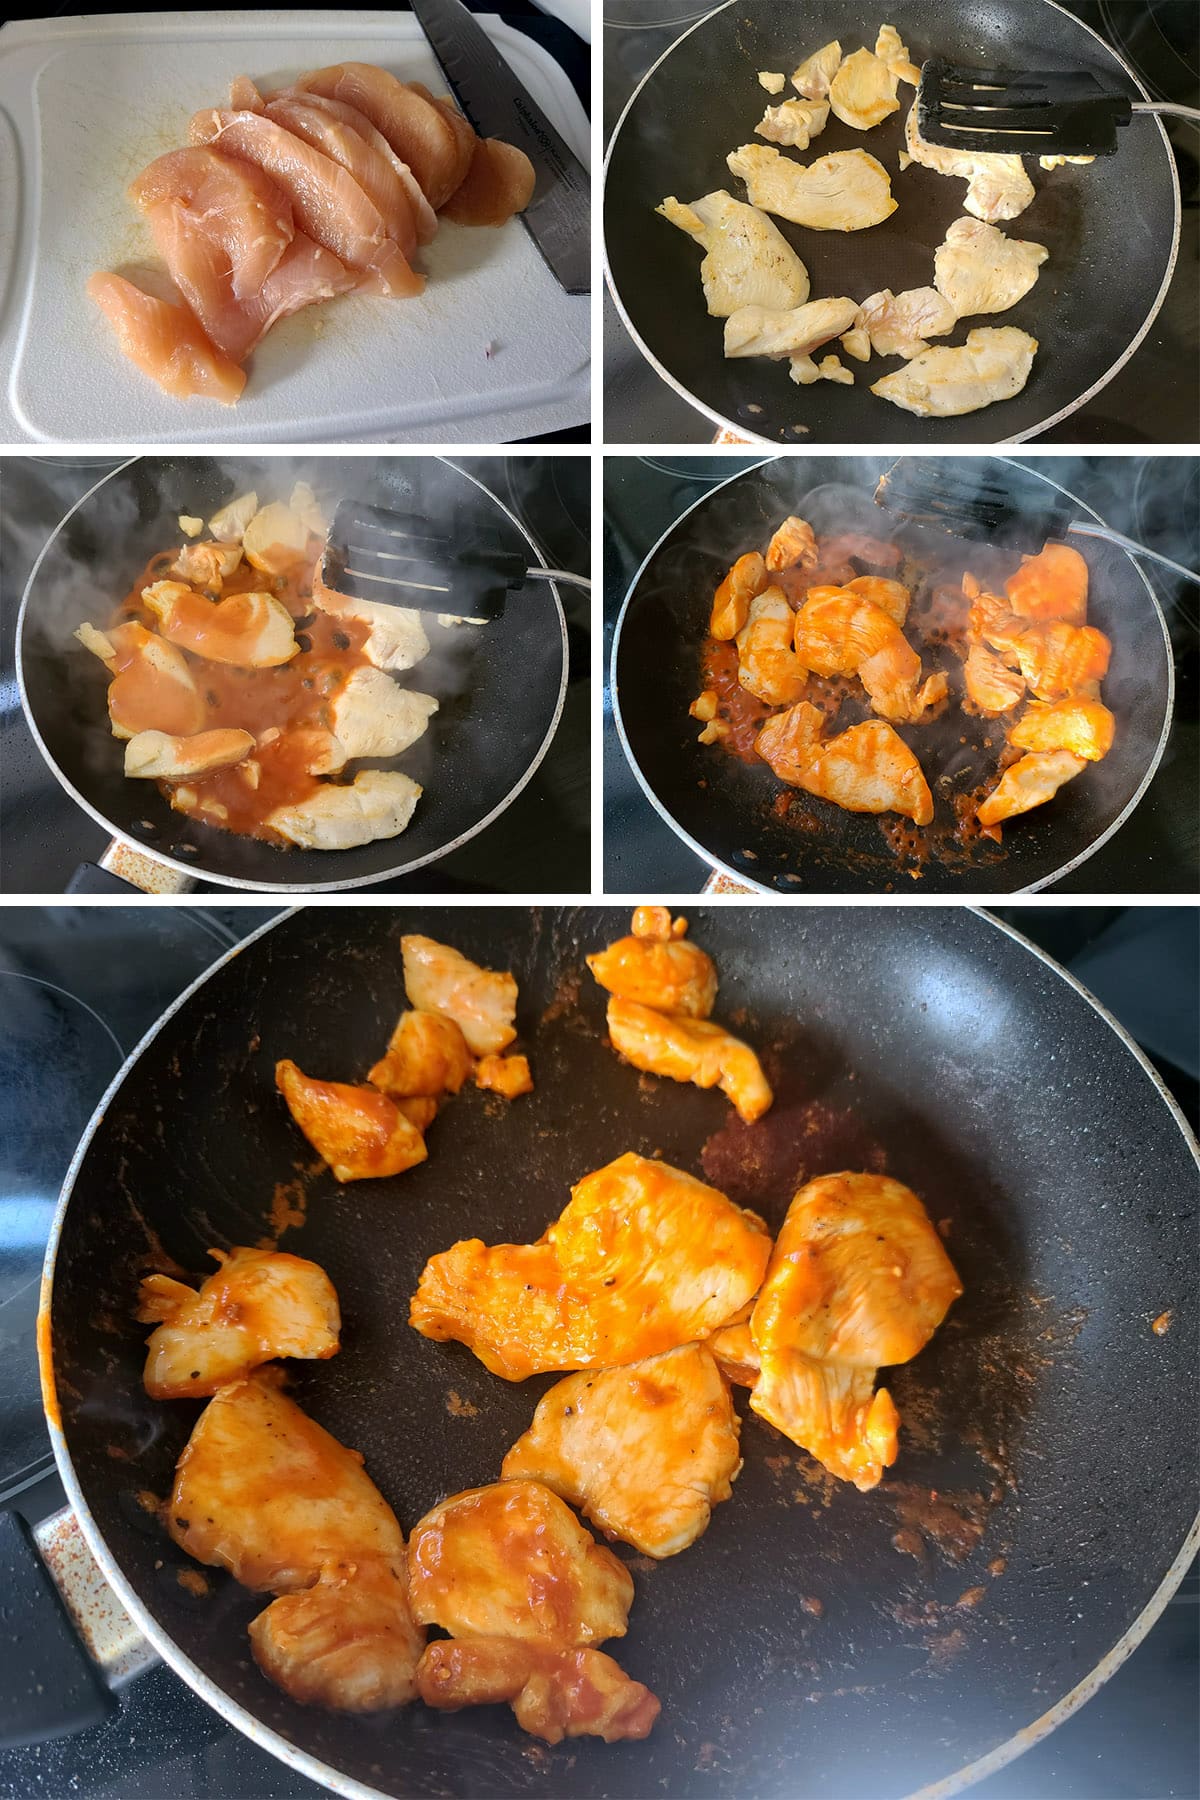 A 5 part image showing the chicken breast being sliced, cooked, coated in hot sauce, and cooked to a glaze.